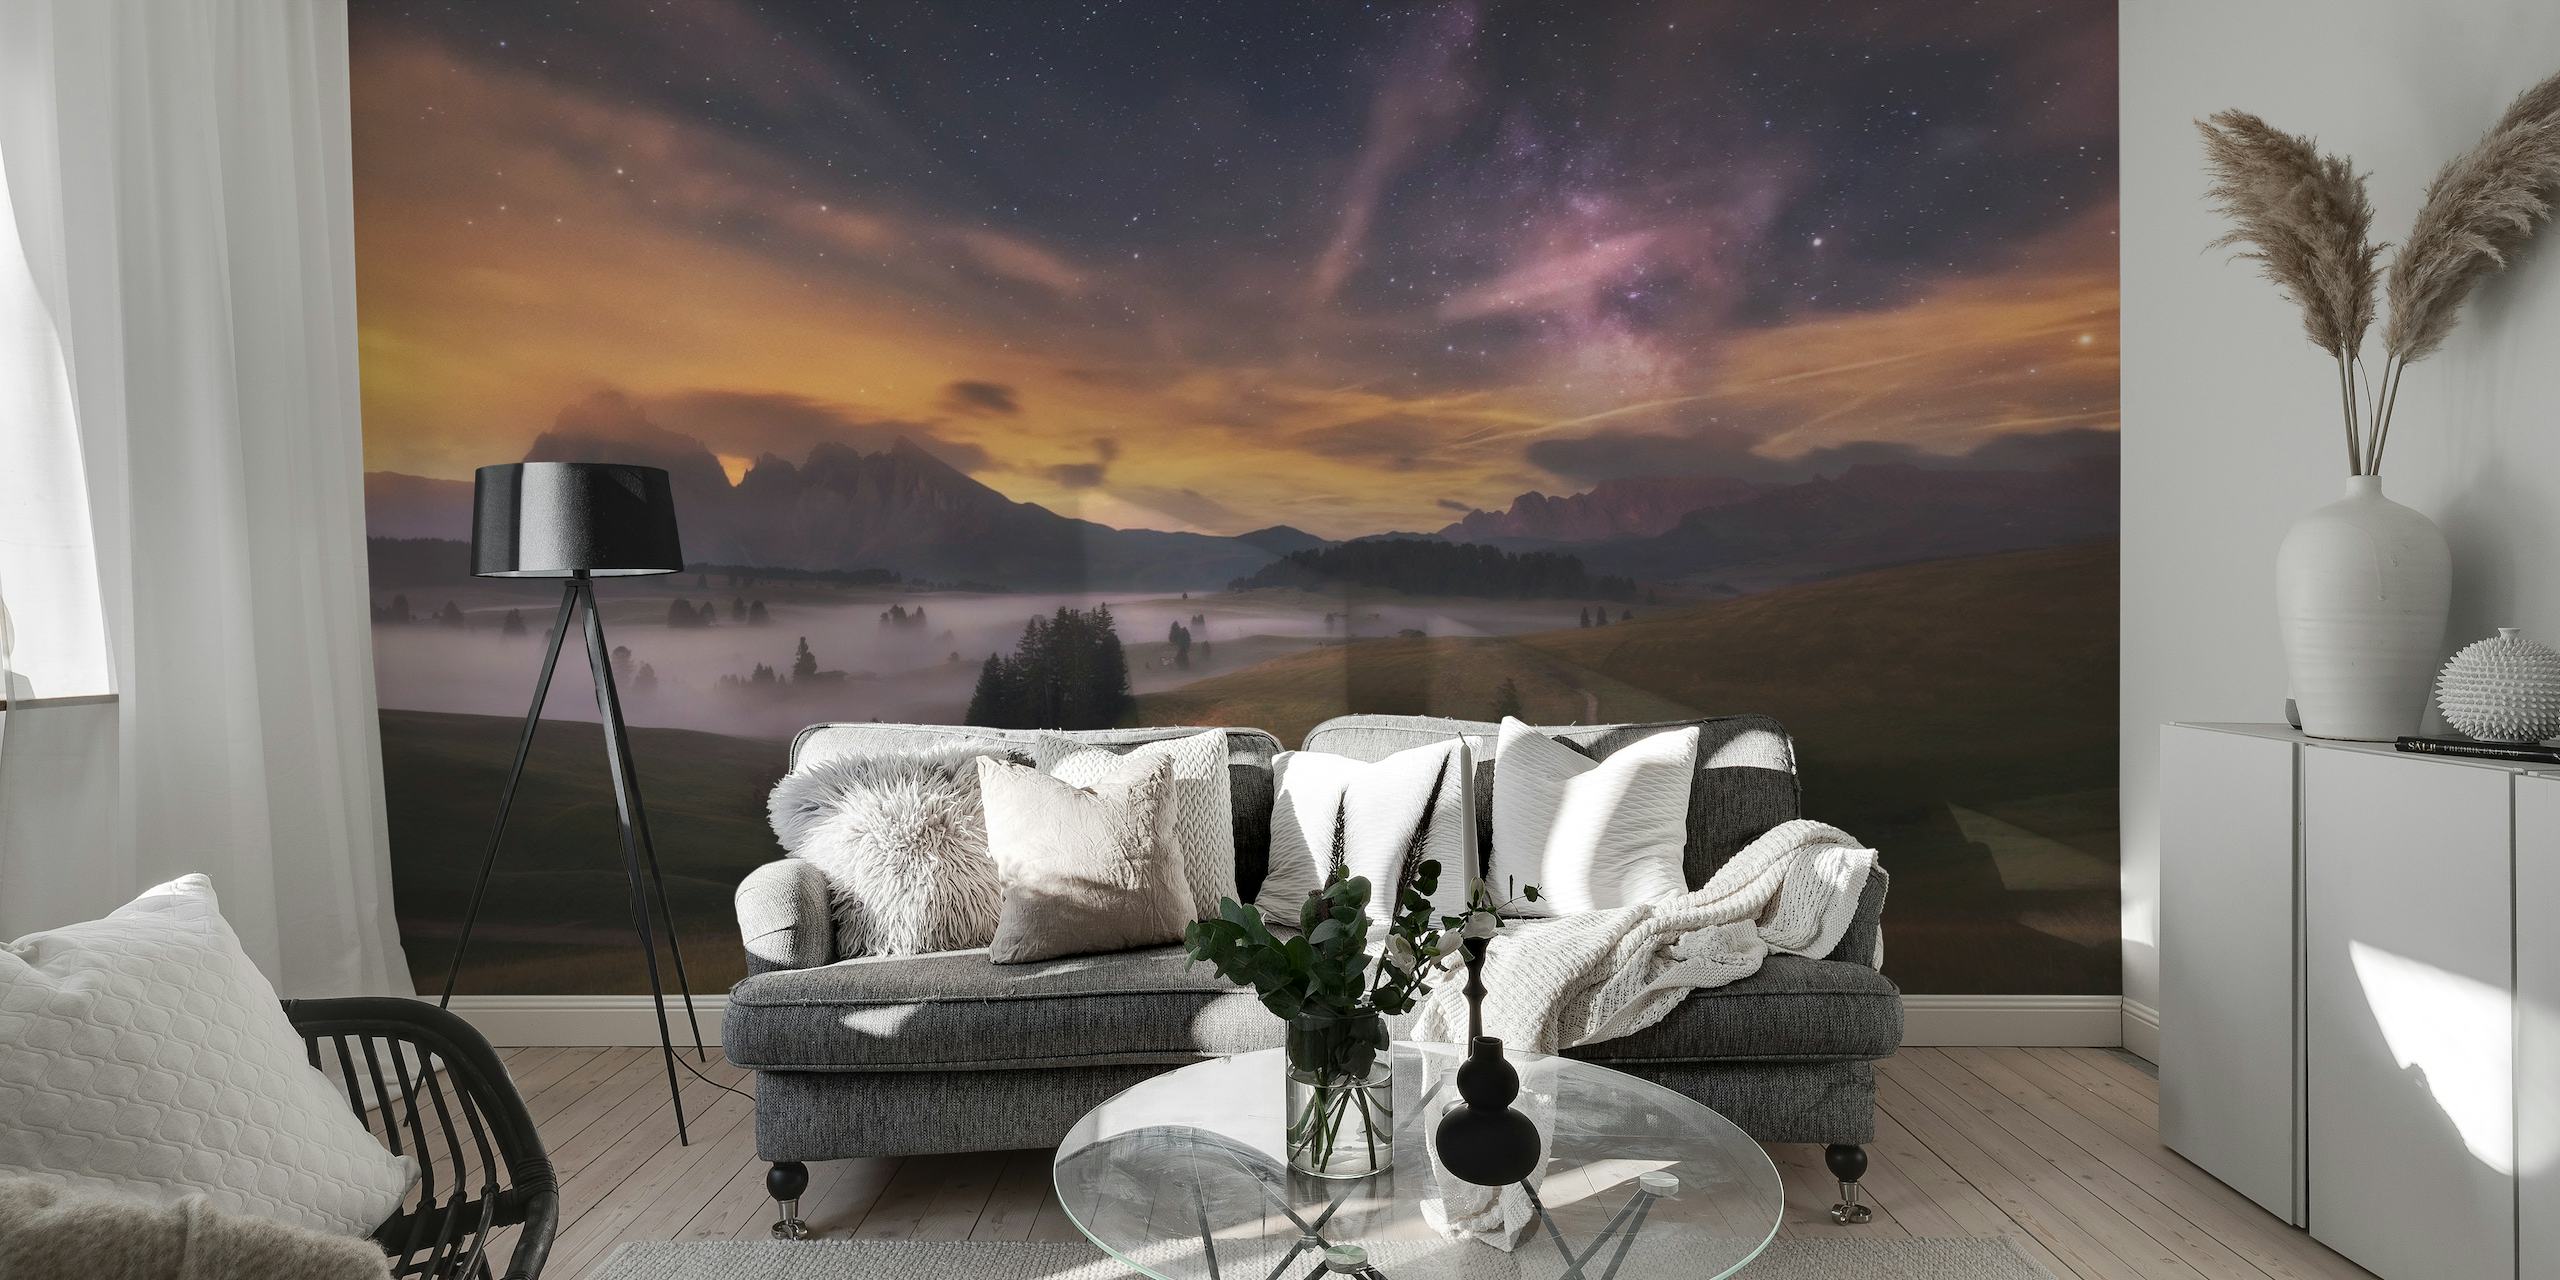 Alpe di Siusi at night wall mural featuring starry sky and mountain landscape